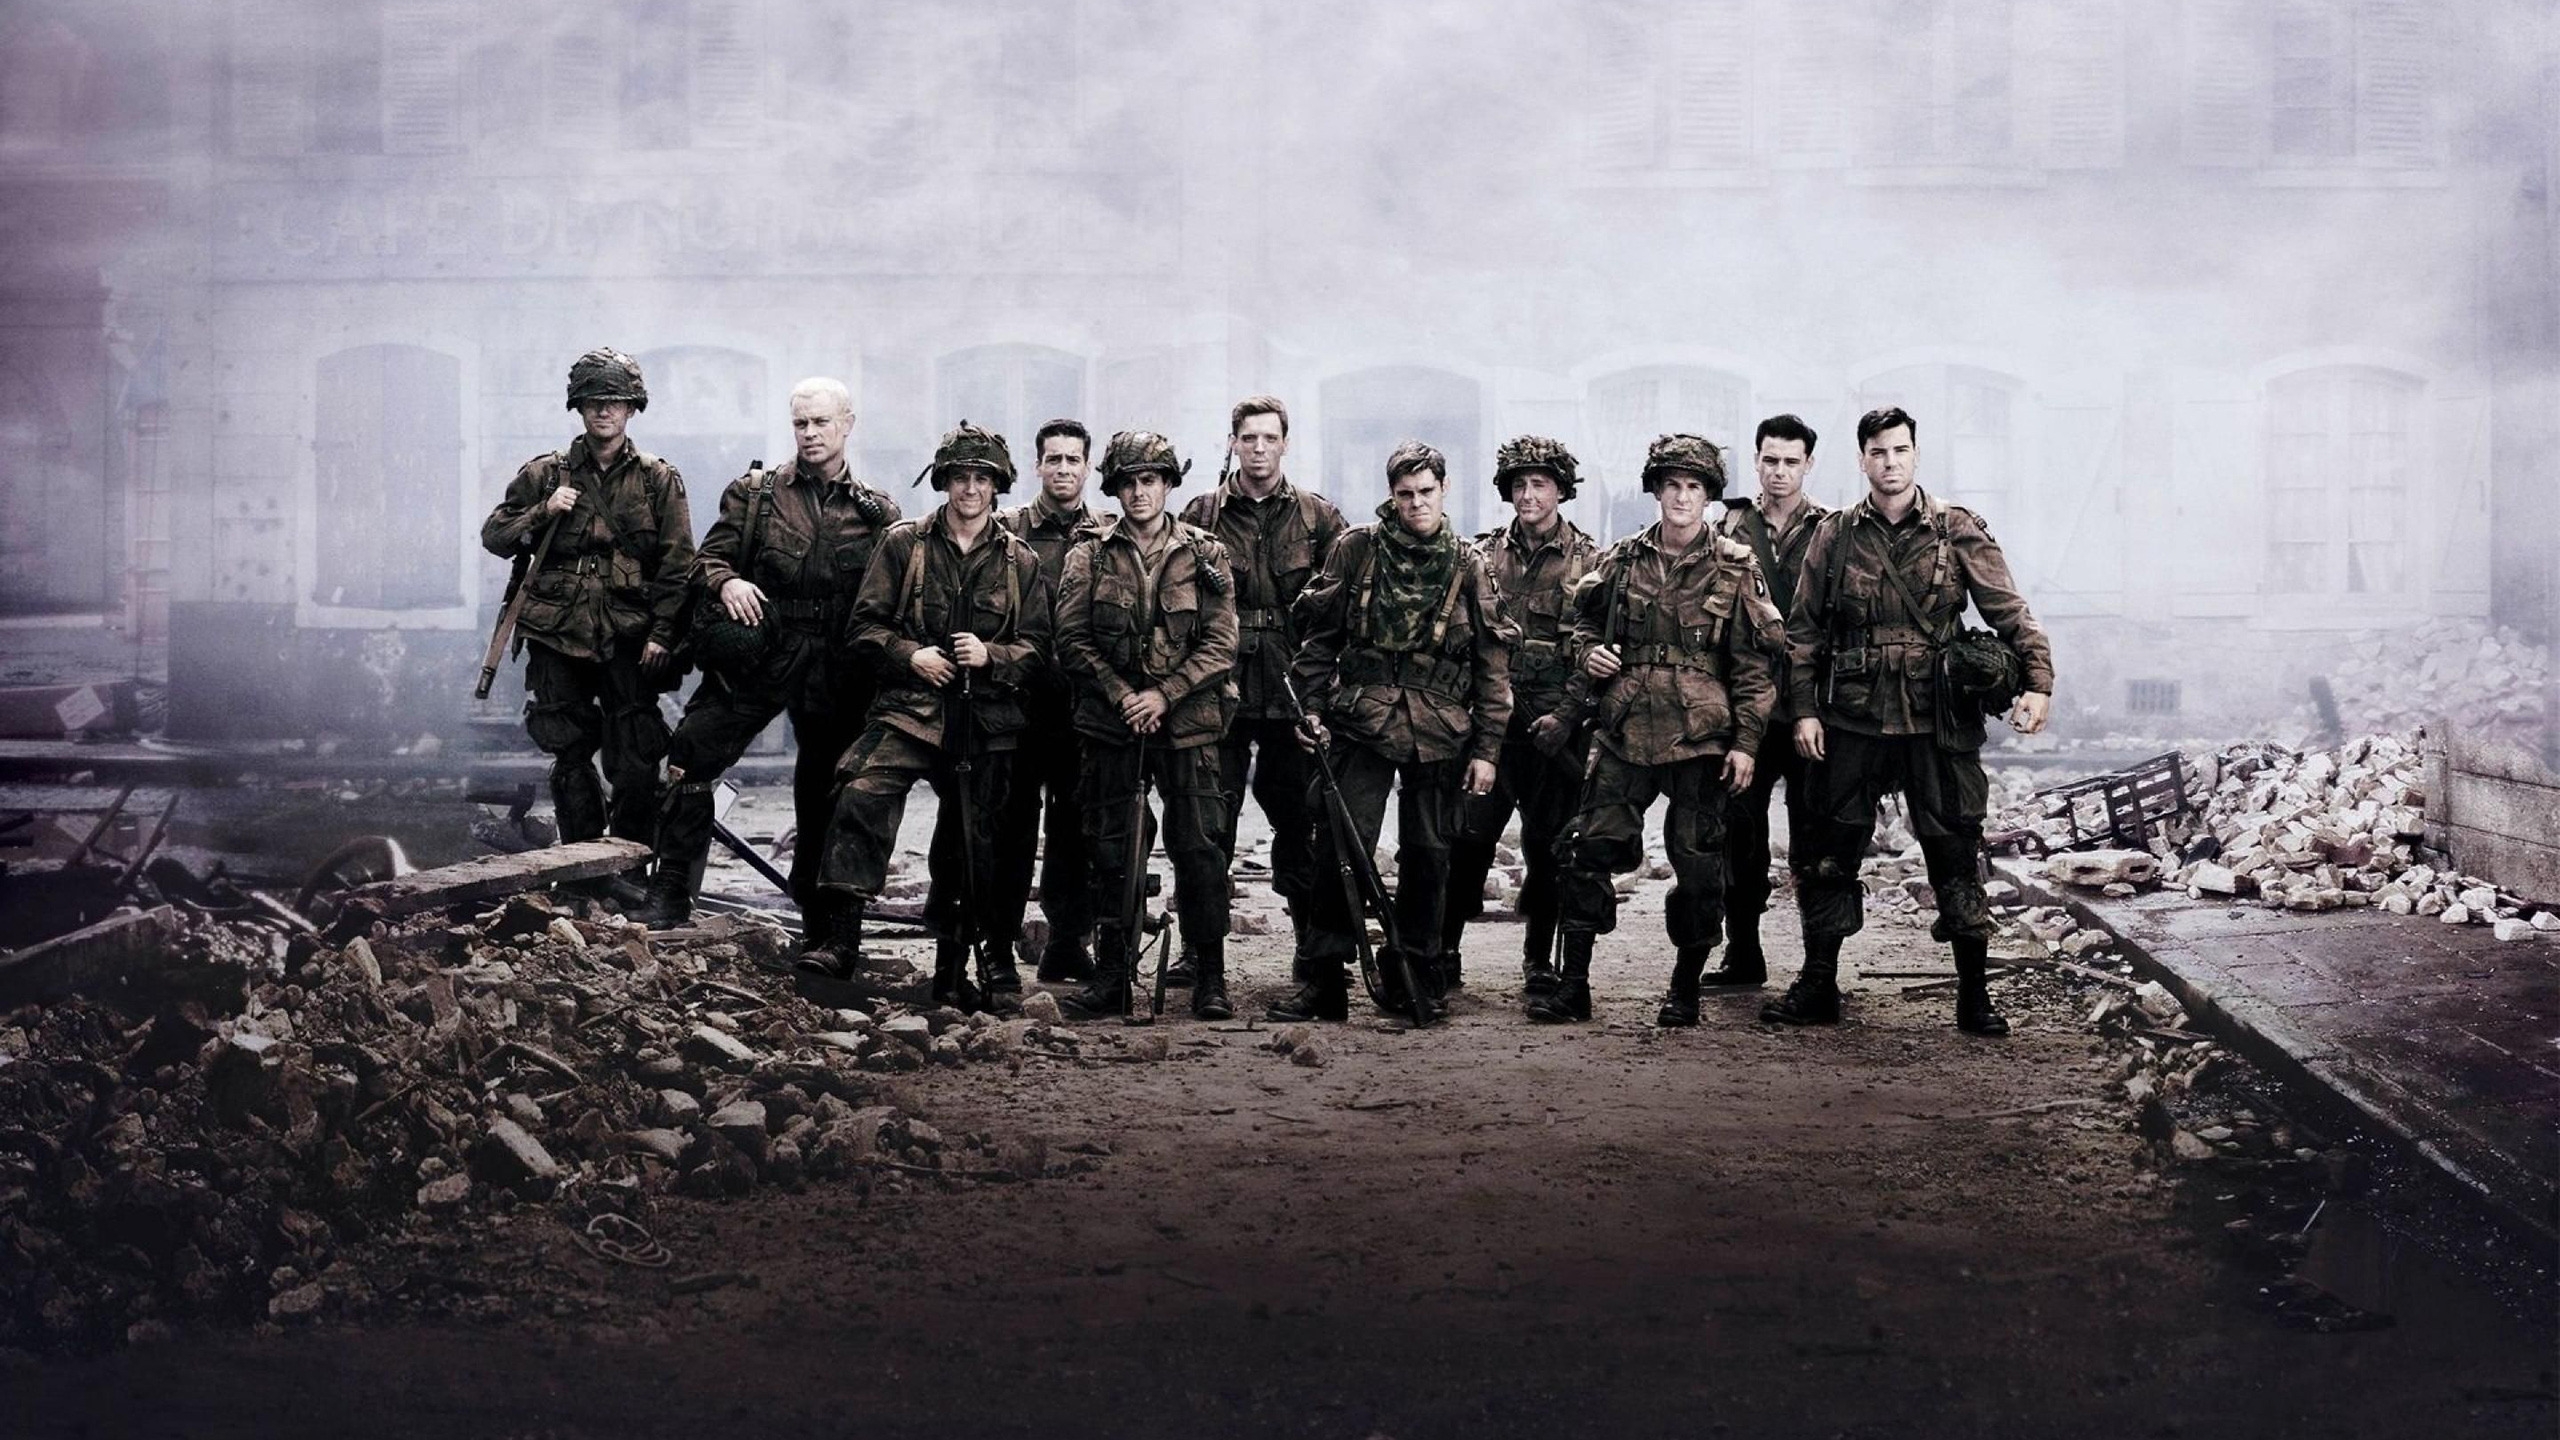 Band of Brothers Cast for 2560x1440 HDTV resolution